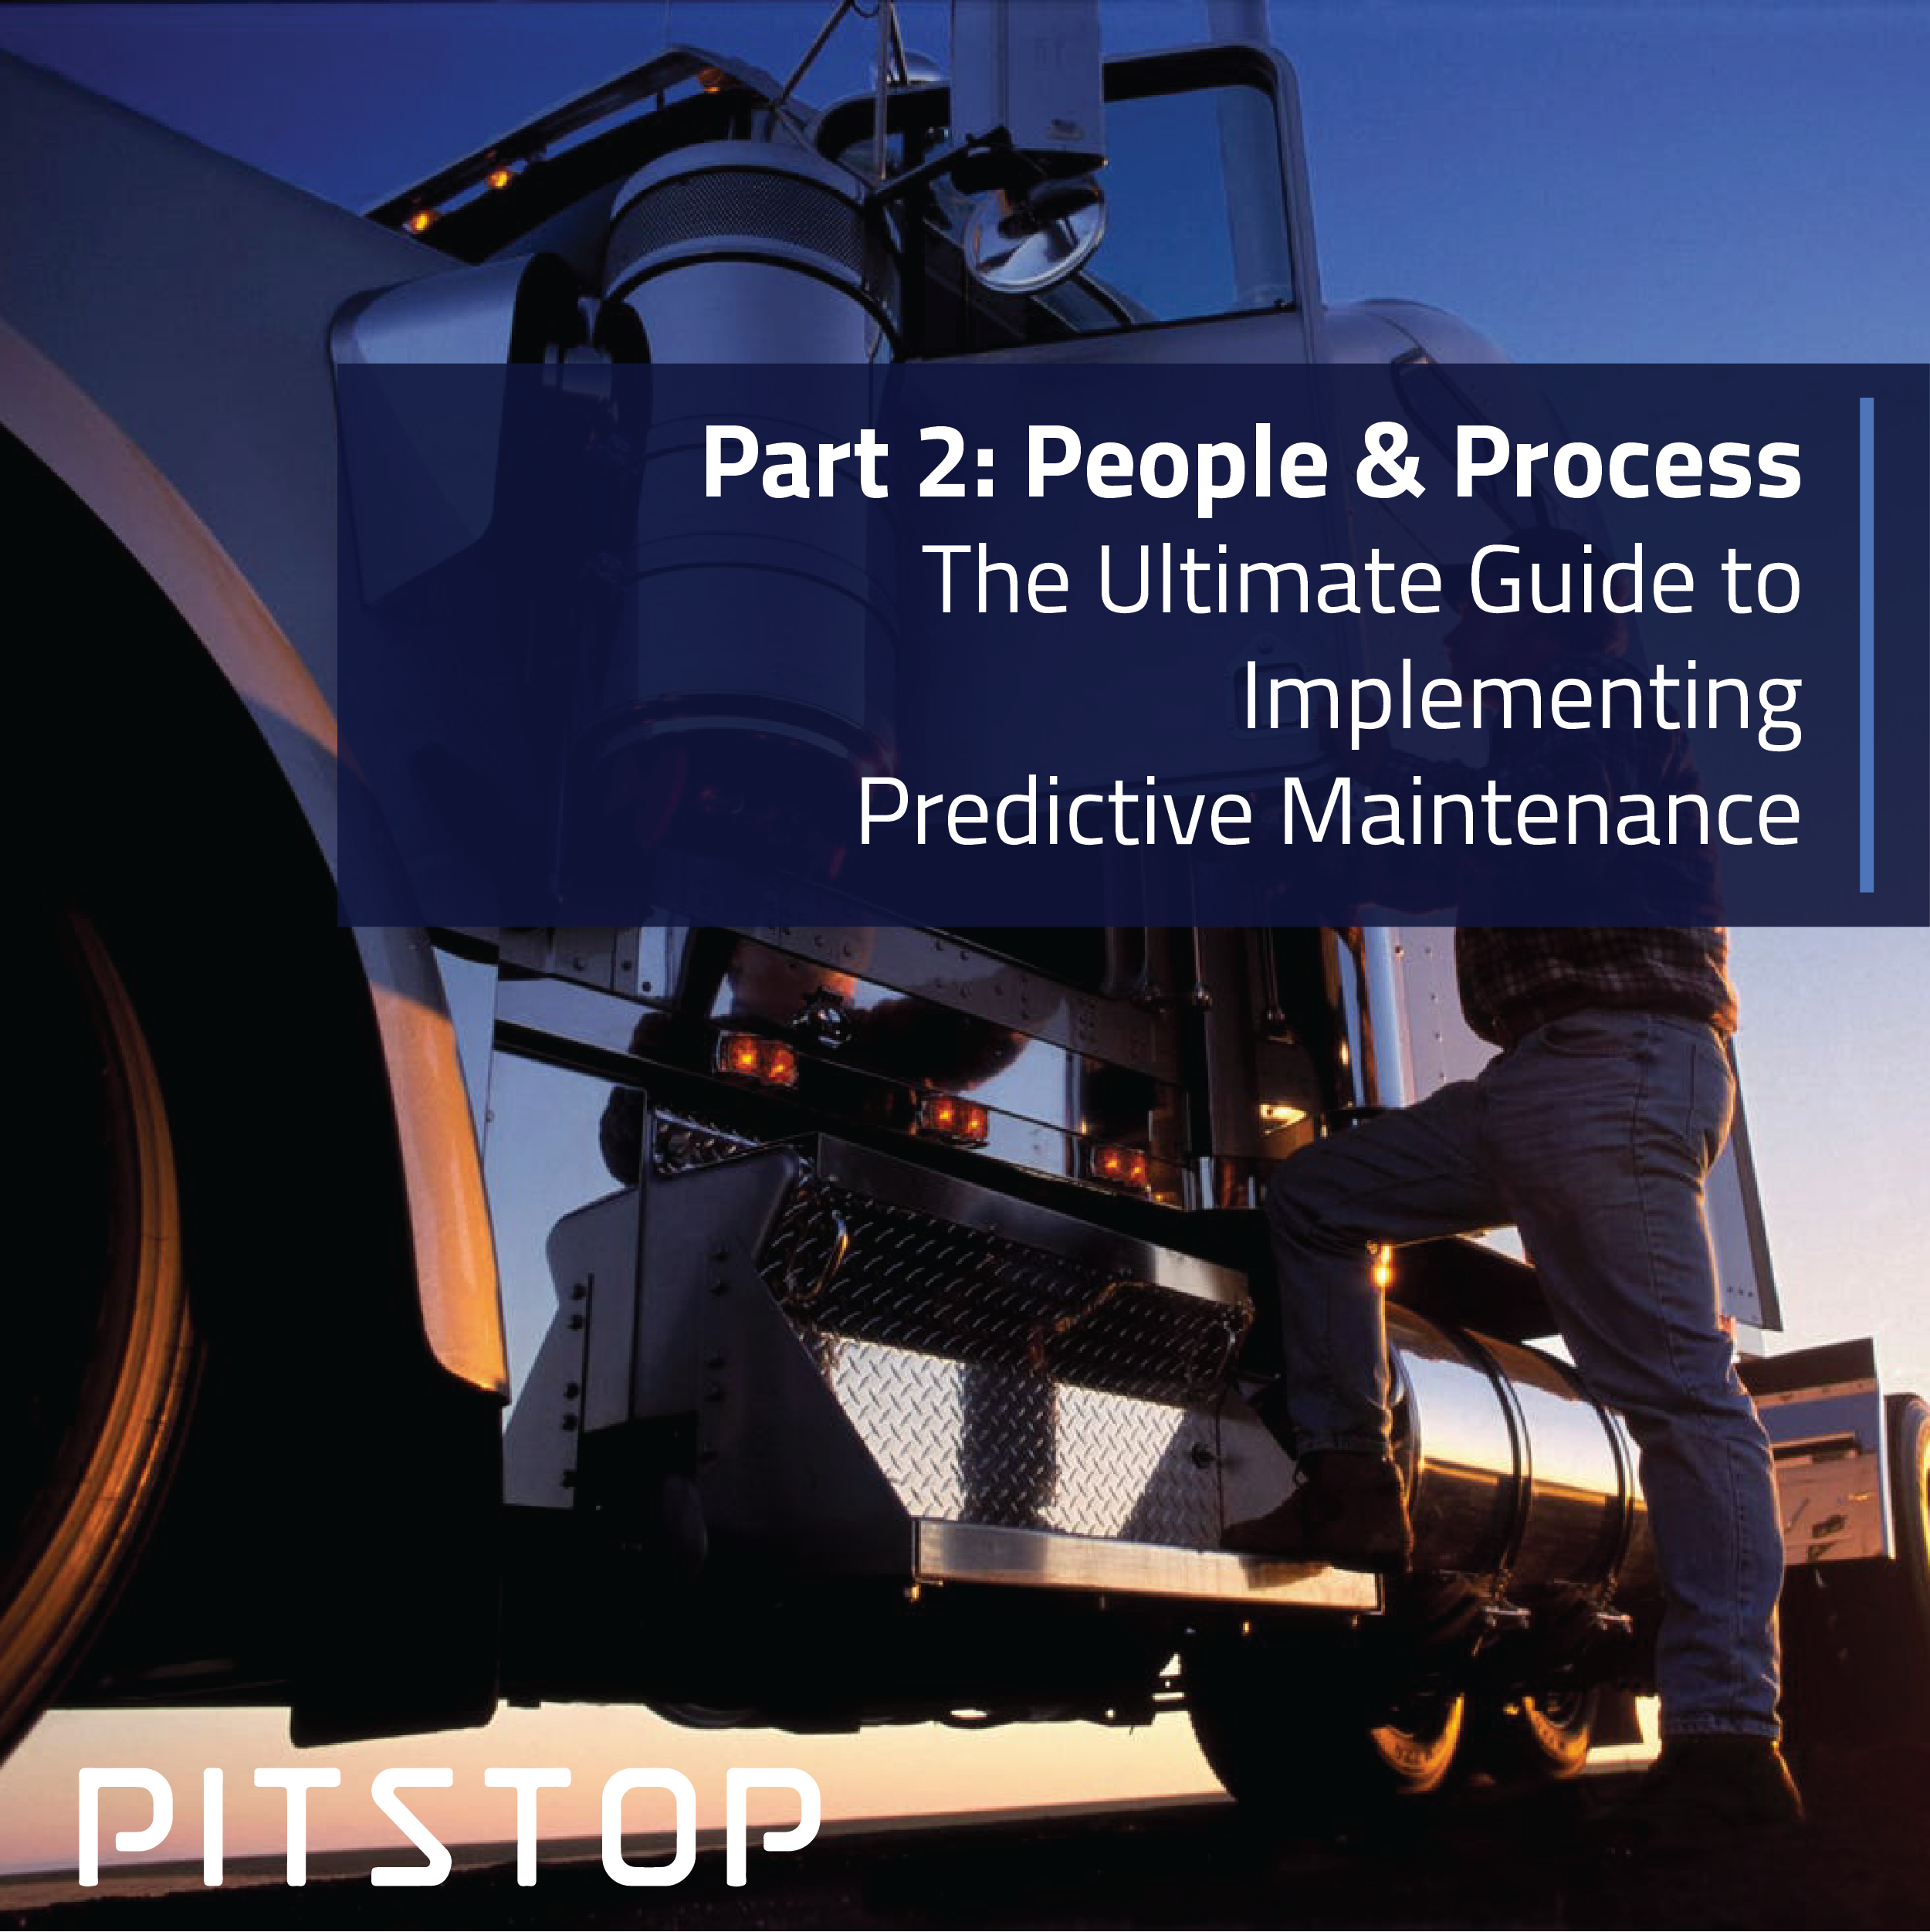 The Ultimate Guide to Implementing Predictive Maintenance – Part 2